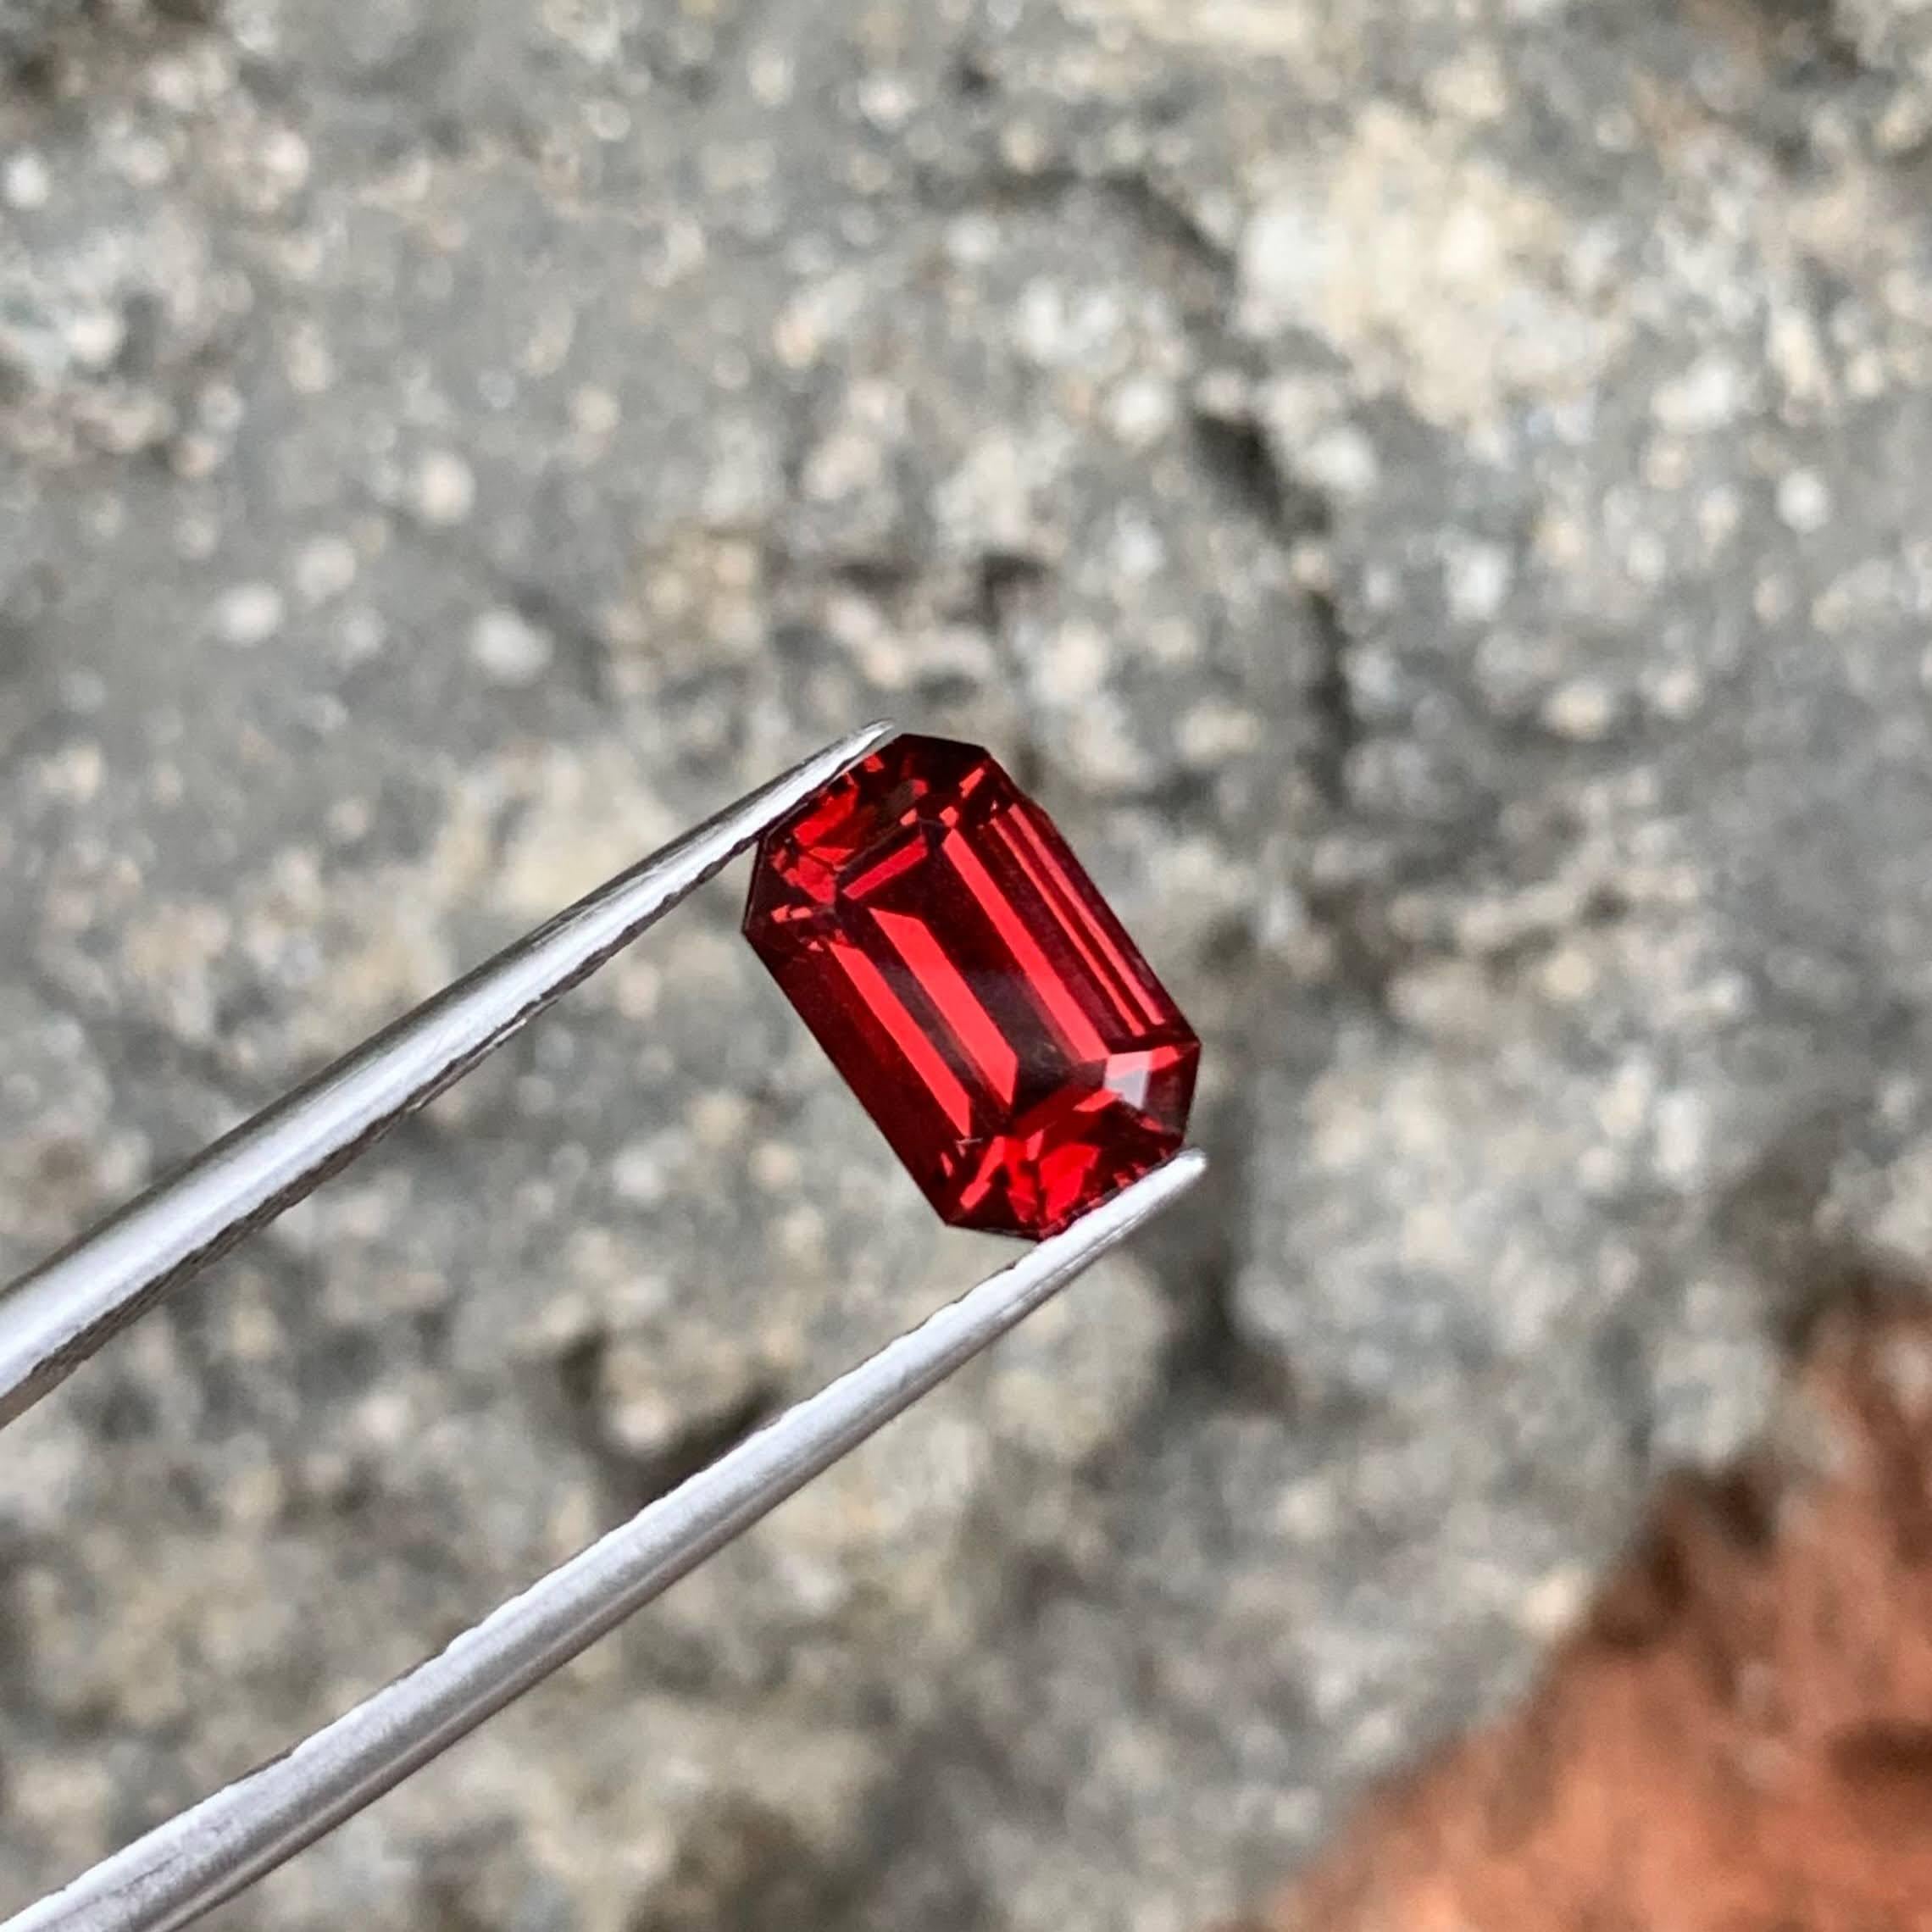 Women's or Men's 2.05 Carats Red Loose Garnet Stone Emerald Cut Natural Madagascar's Gemstone For Sale